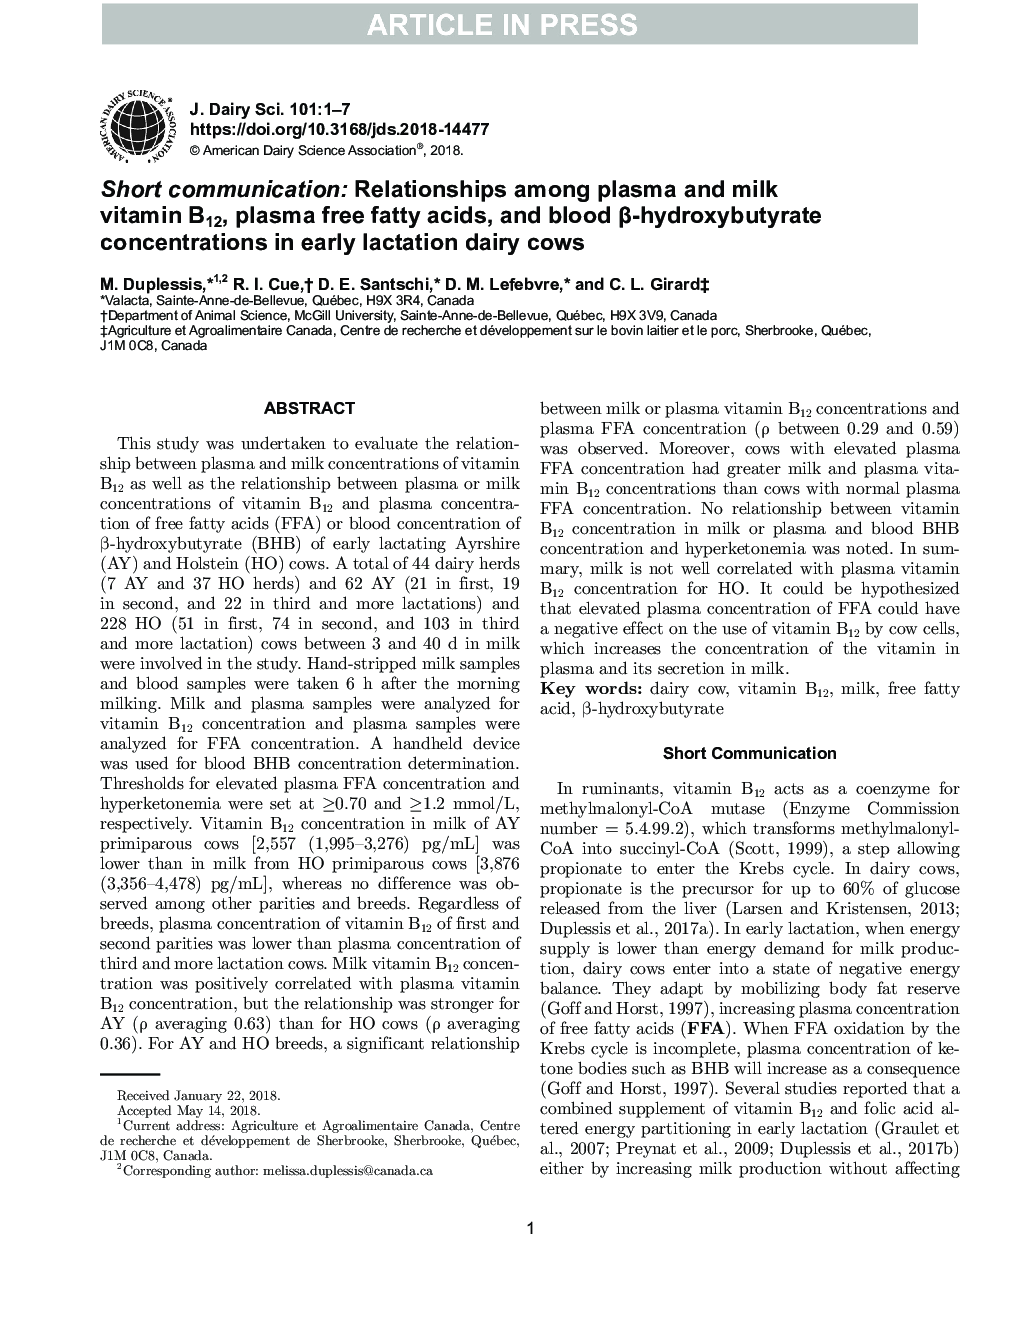 Short communication: Relationships among plasma and milk vitamin B12, plasma free fatty acids, and blood Î²-hydroxybutyrate concentrations in early lactation dairy cows